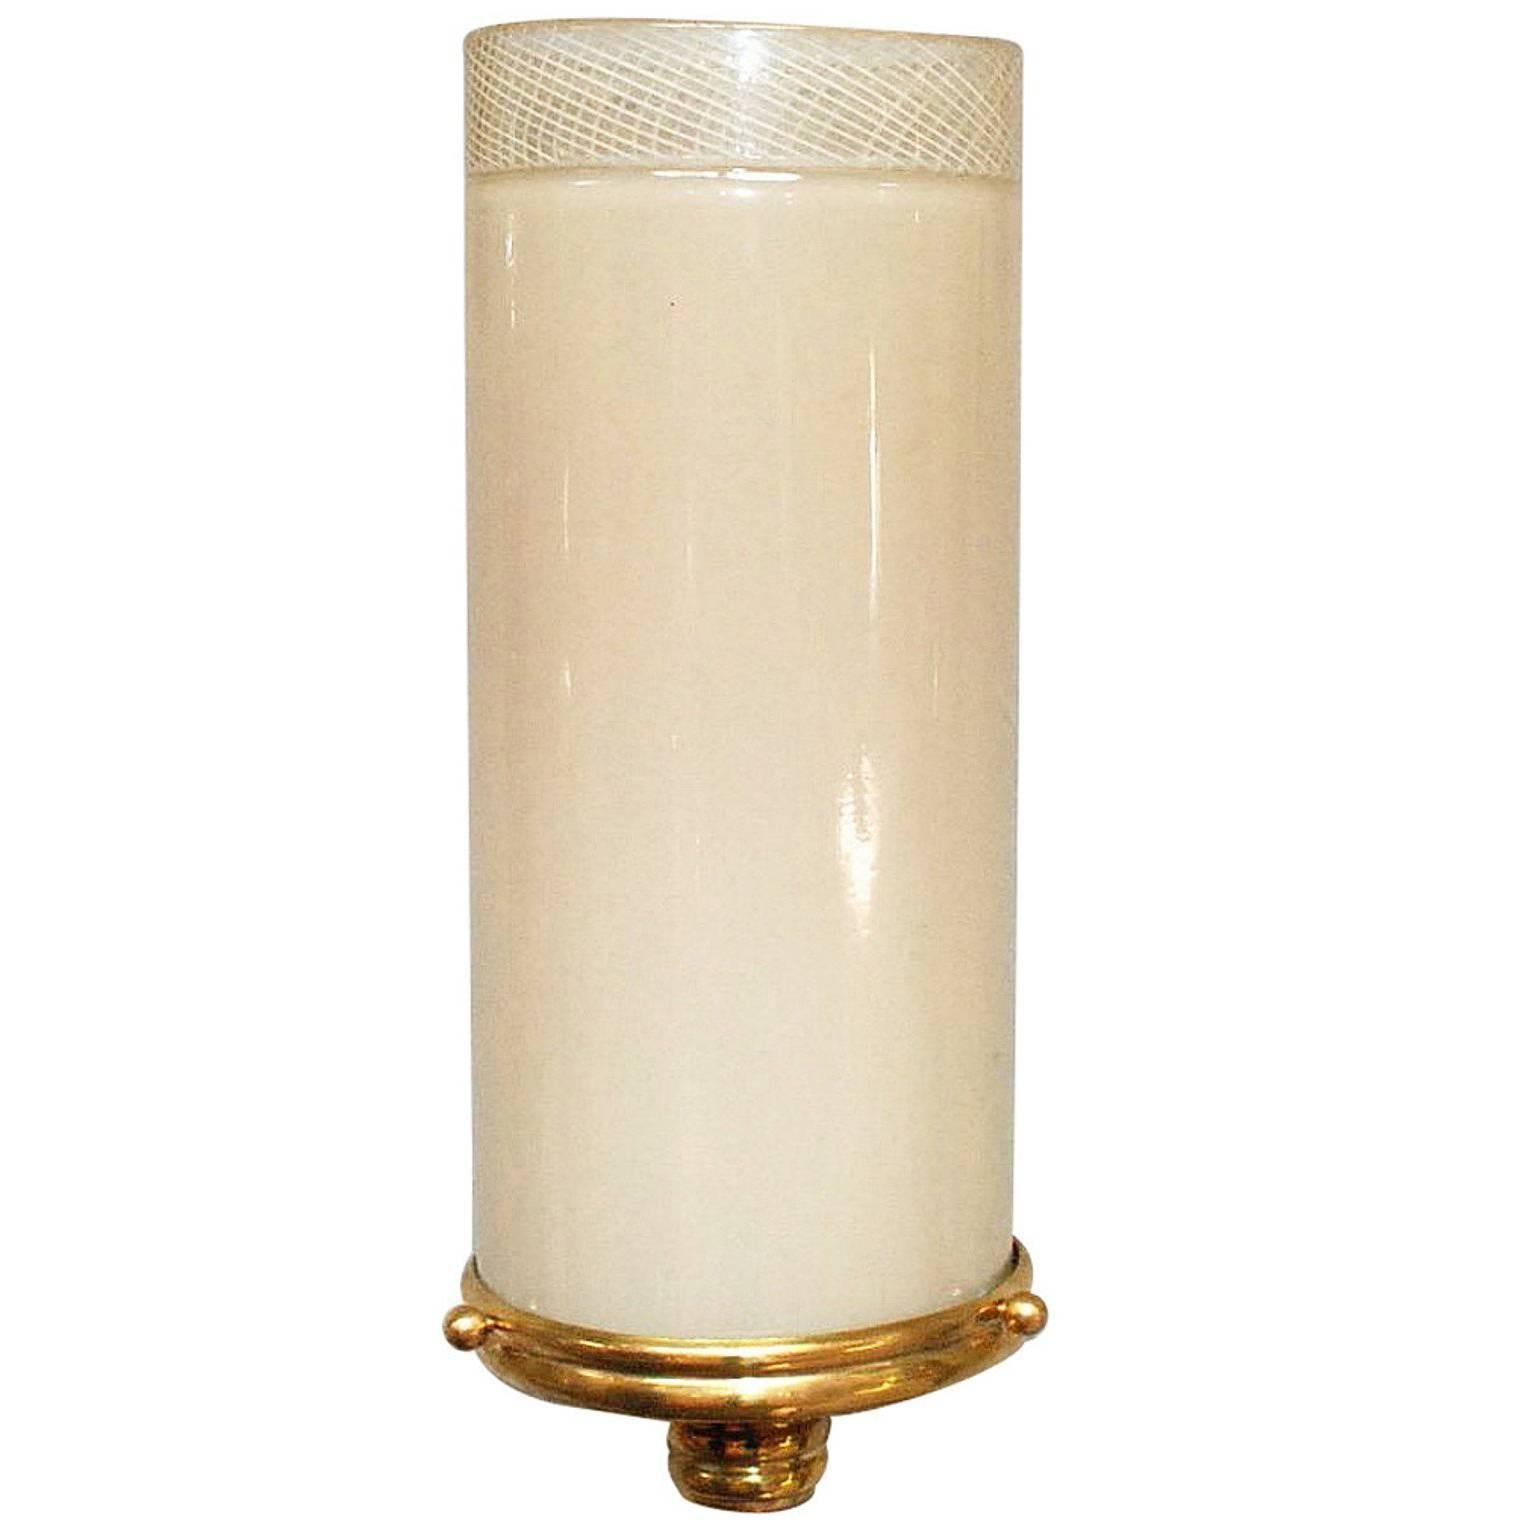 Italian wall lights with soft pink Murano glass hand blown into a tube shade with zig zag patterns in “Reticello” technique, mounted on brass metal frame, designed by Venini, circa 1930s, made in Italy
1 light / E26 or E27 type / max 40W